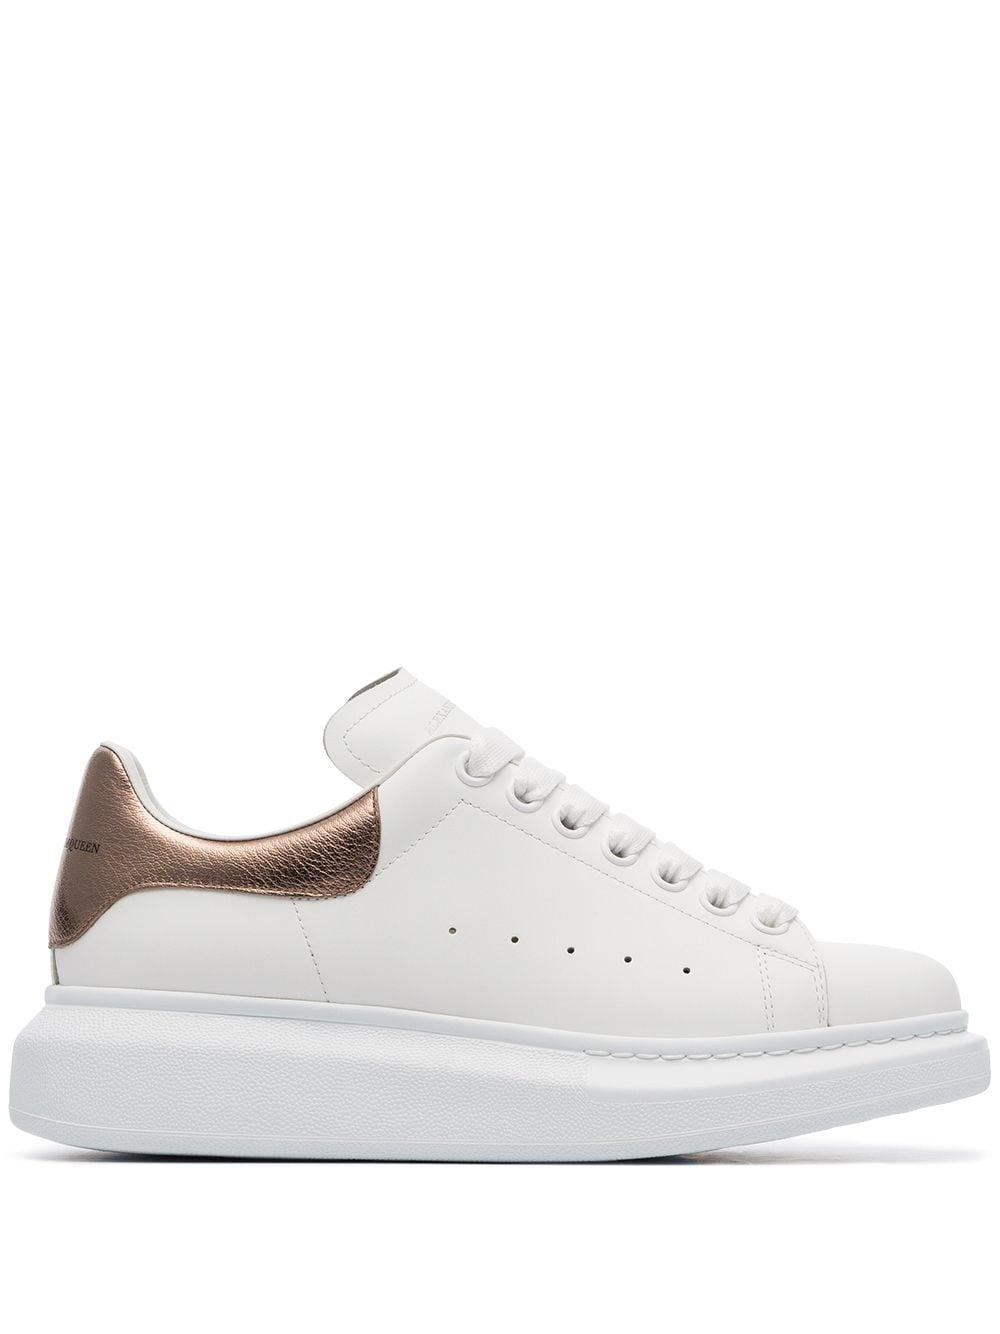 Alexander McQueen Leather White And Rose Gold Oversized Sneakers - Lyst